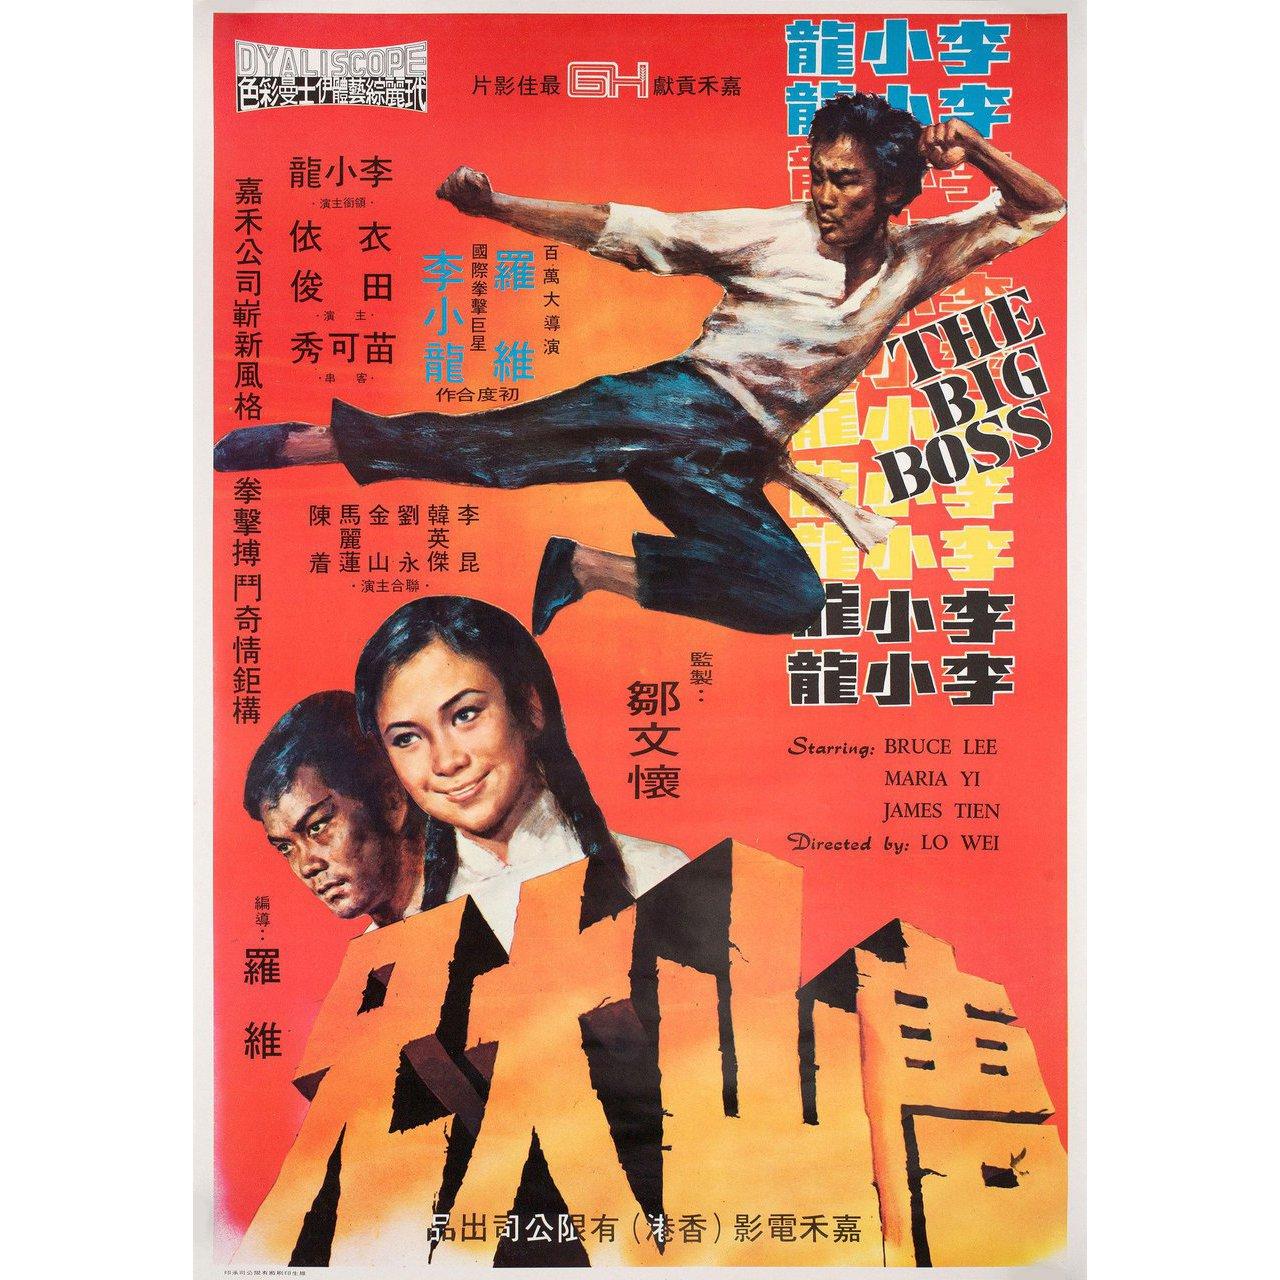 Original 1970s re-release Hong Kong poster for the film “Fists of Fury” (Tang shan da xiong) directed by Wei Lo / Chia-hsiang Wu with Bruce Lee / Maria Yi / James Tien / Marilyn Bautista. Fine condition, rolled. Please note: the size is stated in